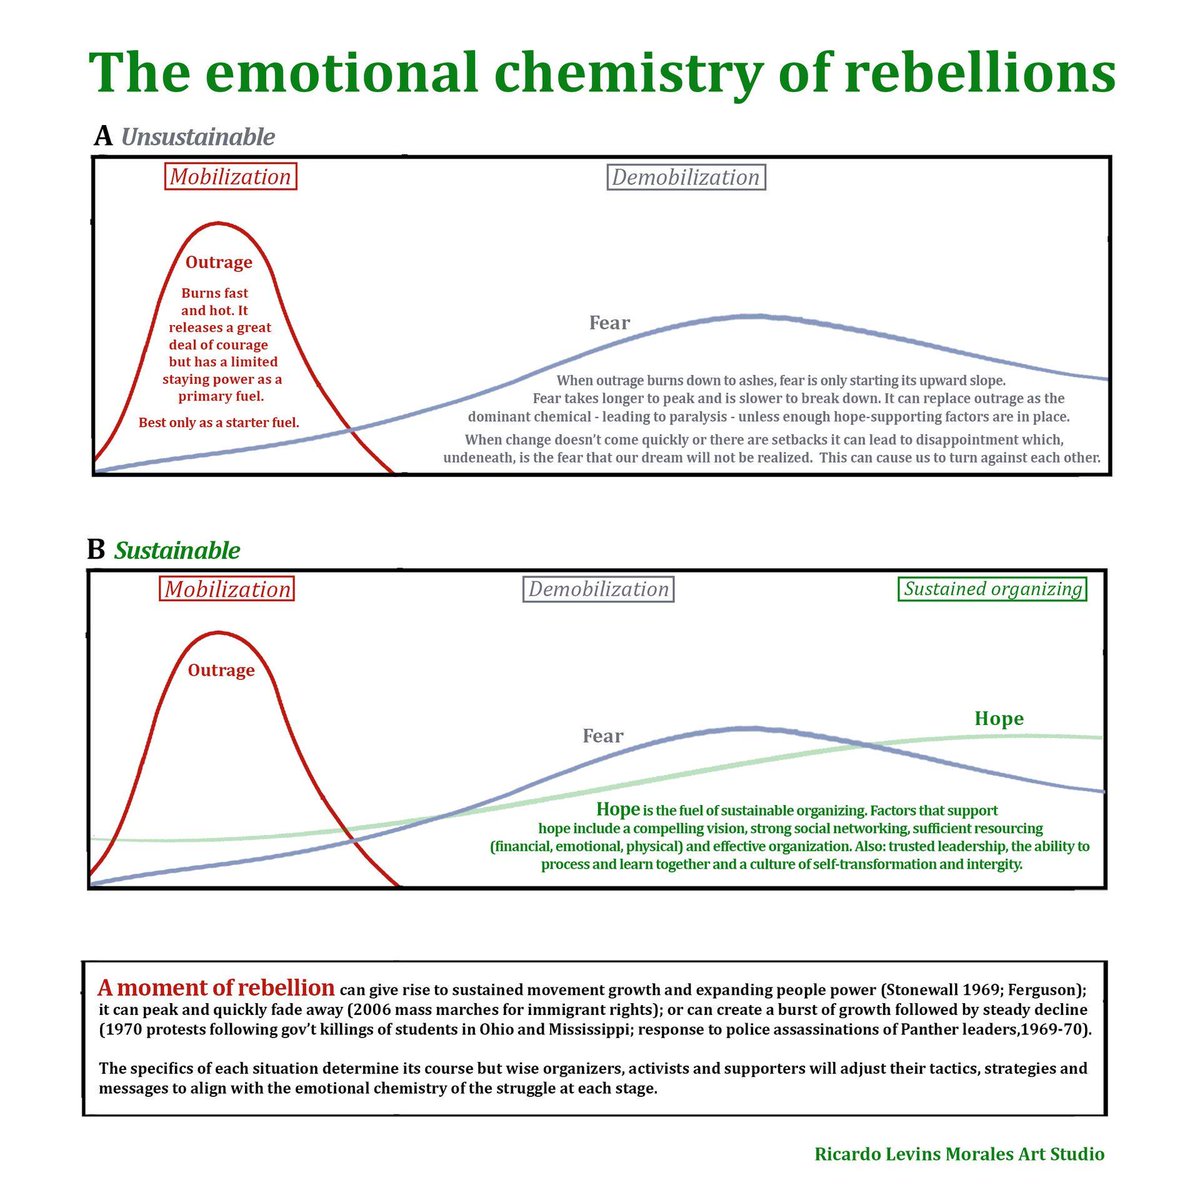 A thread on the emotional chemistry of rebellions.